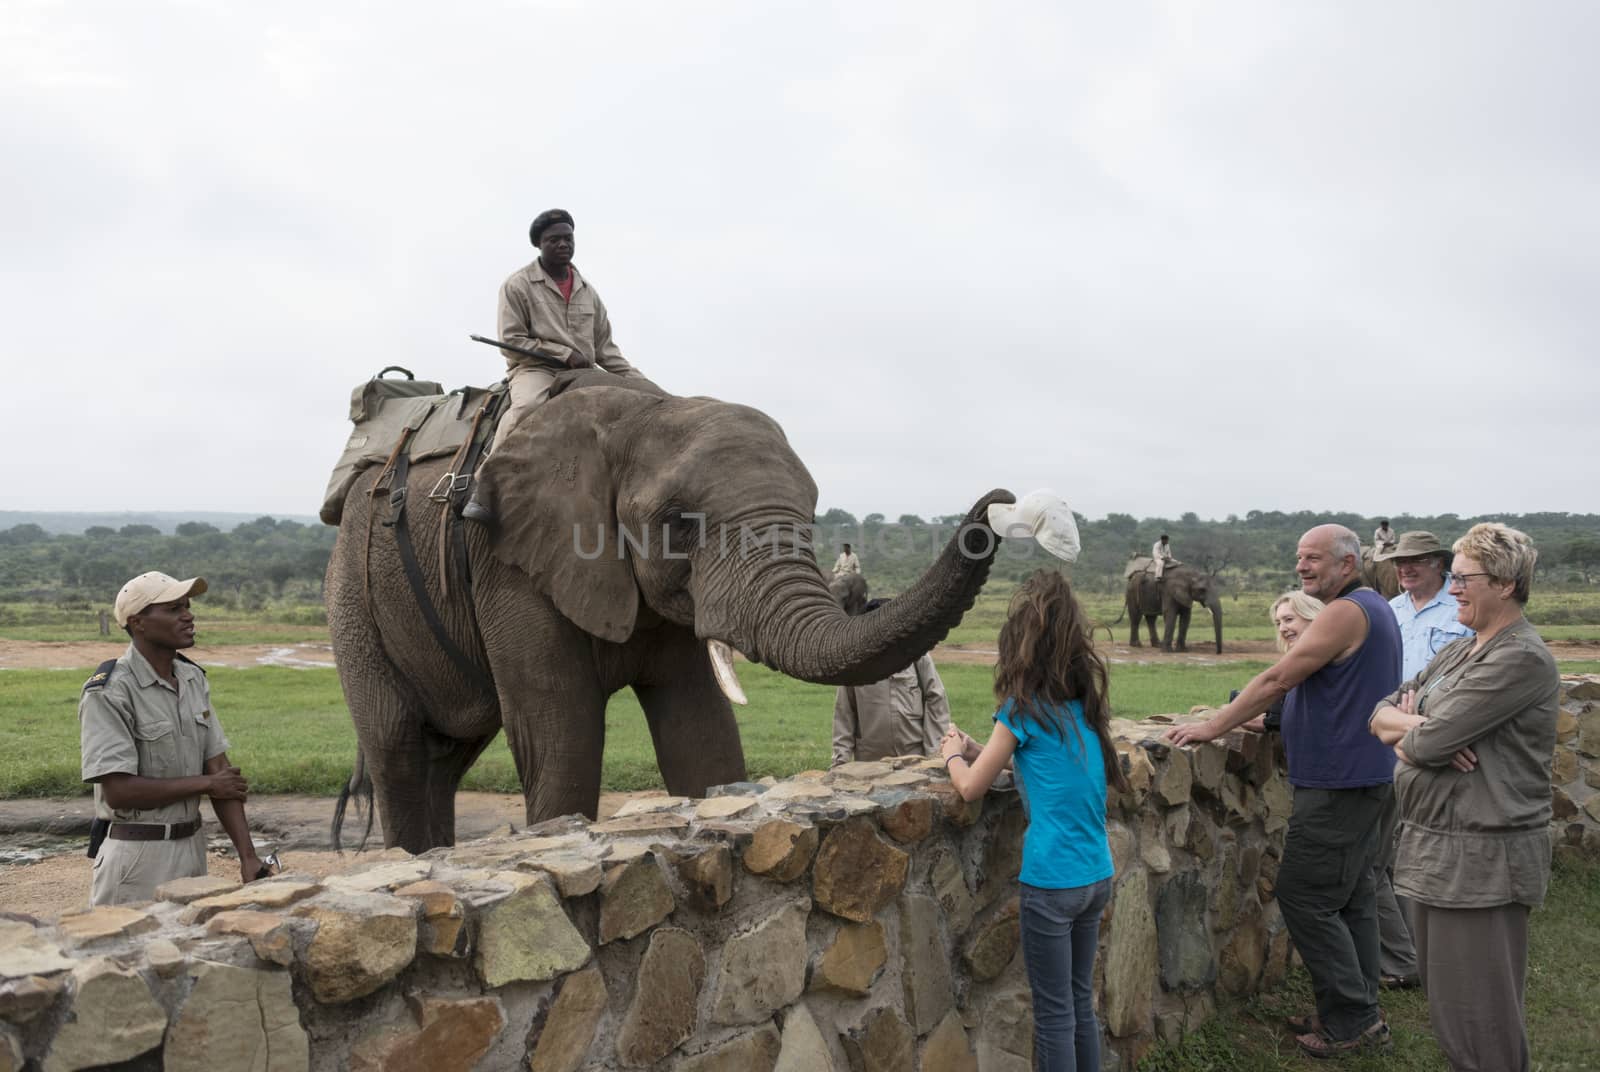 rangers sitting on elephants back and elephant takes hat from girls head